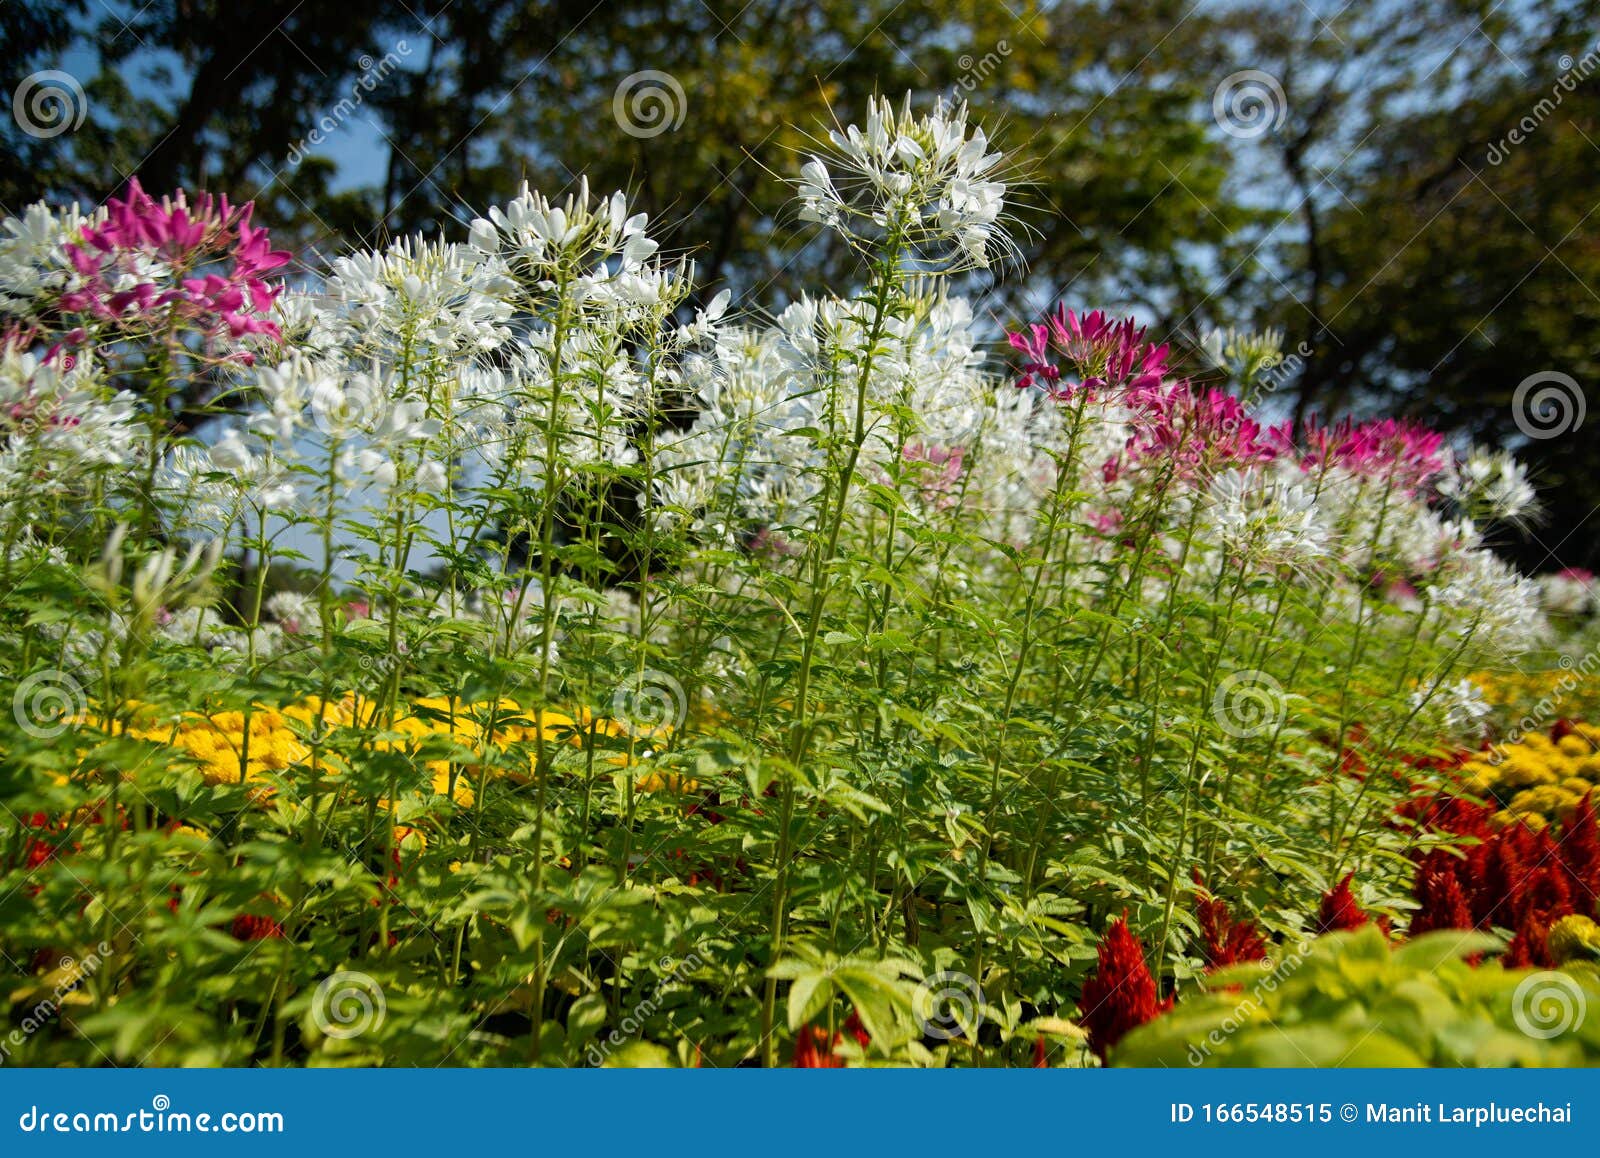 Spider Flower Or Cleome Hassleriana Or Spider Plant Or Grandfathers Whiskers Stock Image Image Of Composition Horticulture 166548515